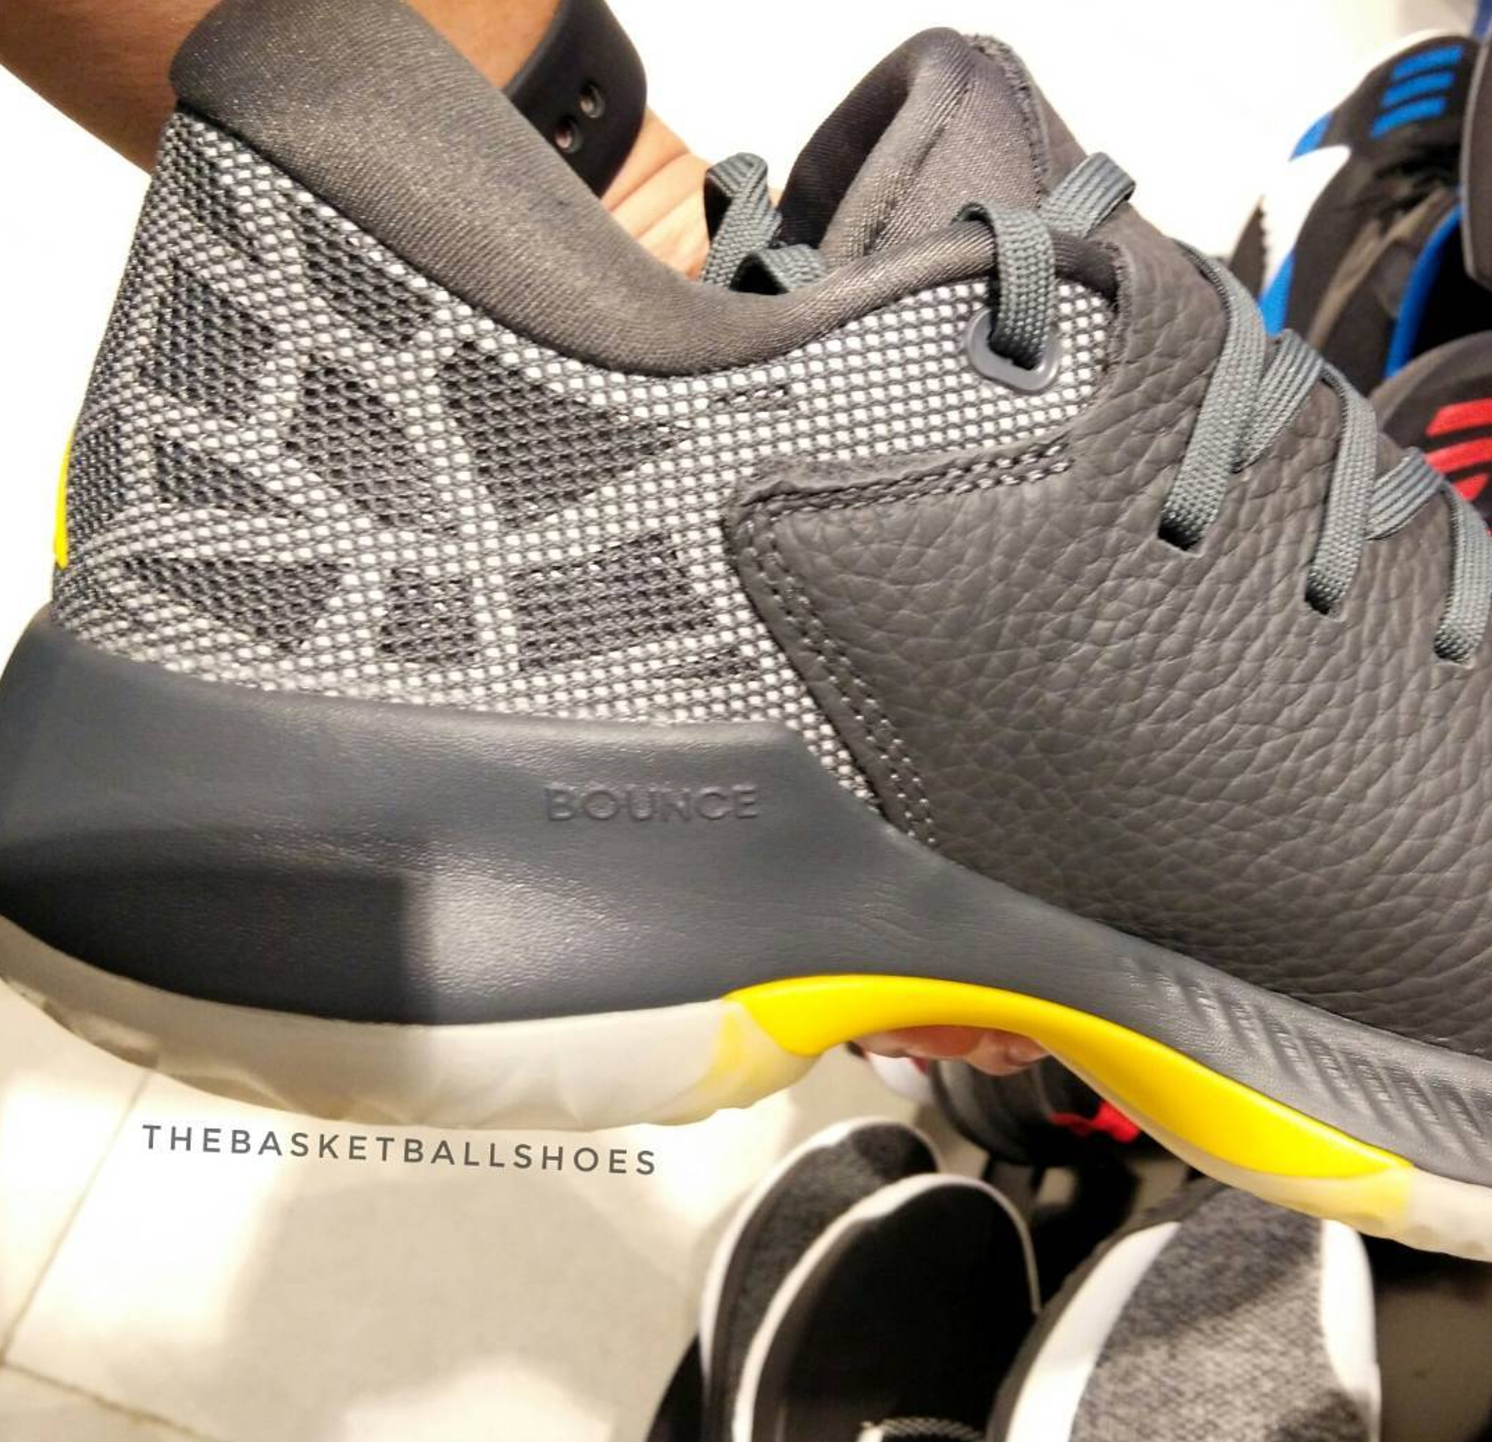 The adidas Harden B/E, Another Harden Build, Lands Overseas with Bounce Cushion - WearTesters